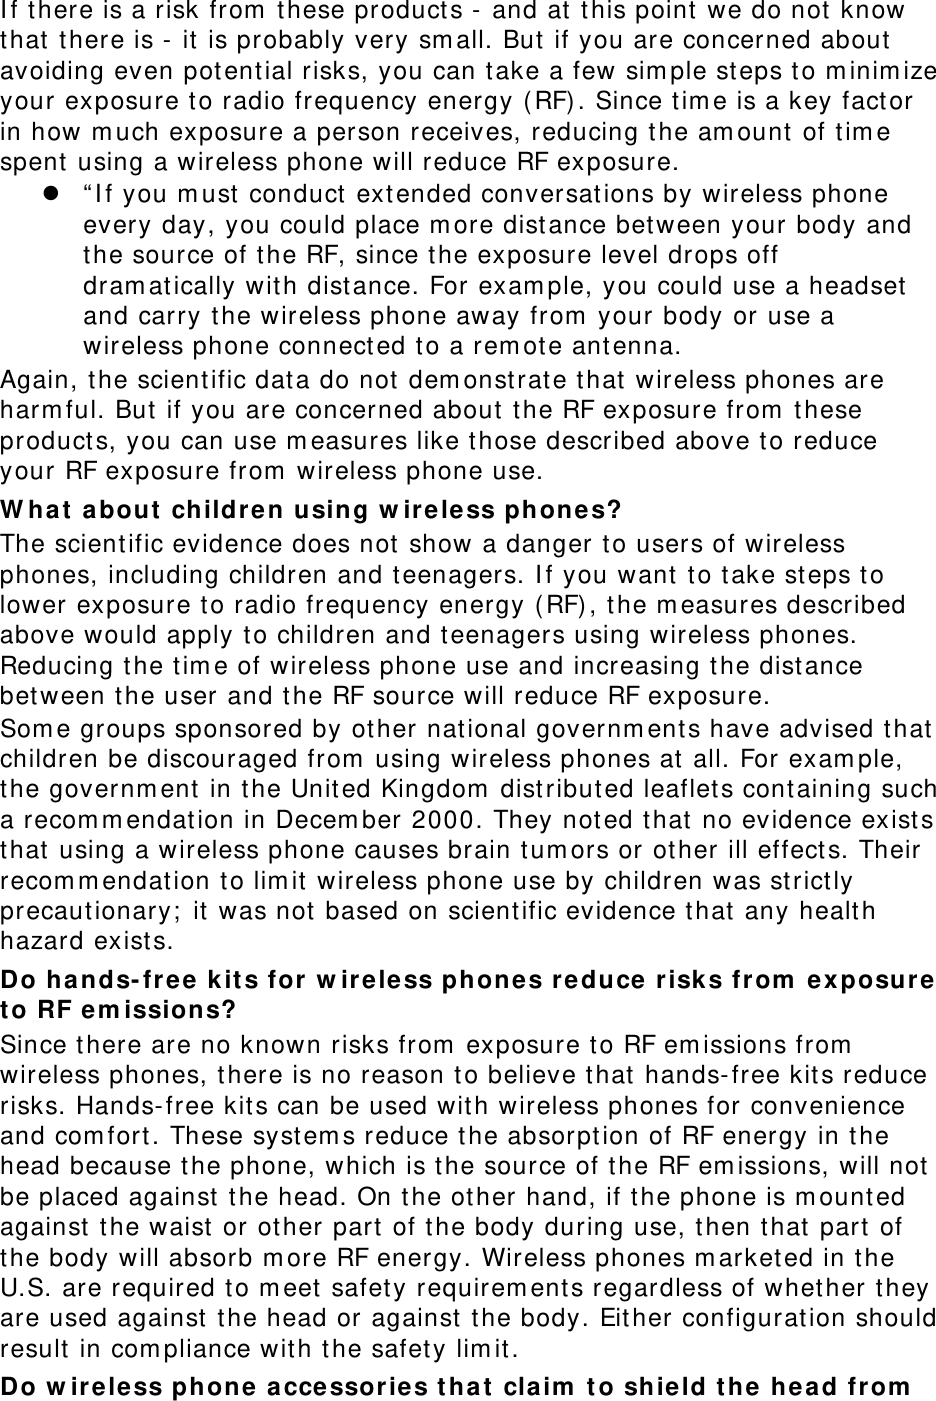 I f t here is a risk from  t hese product s -  and at t his point  we do not know that t here is -  it is probably very sm all. But  if you are concerned about  avoiding even potent ial risks, you can t ake a few sim ple st eps to m inim ize your exposure t o radio frequency energy ( RF) . Since t im e is a key fact or in how m uch exposure a person receives, reducing t he am ount  of t im e spent  using a wireless phone will reduce RF exposure.  “ I f you m ust  conduct  extended conversations by wireless phone every day, you could place m ore dist ance between your body and the source of t he RF, since t he exposure level drops off dram at ically wit h dist ance. For exam ple, you could use a headset  and carry the wireless phone away from  your body or use a wireless phone connect ed t o a rem ote ant enna. Again, t he scient ific data do not dem onst rate t hat wireless phones are harm ful. But if you are concerned about the RF exposure from  t hese product s, you can use m easures like t hose described above t o reduce your RF exposure from  wireless phone use. W ha t  a bout  children using w irele ss phone s? The scient ific evidence does not show a danger t o users of wireless phones, including children and t eenagers. I f you want  t o t ake st eps t o lower exposure t o radio frequency energy (RF) , t he m easures described above would apply t o children and teenagers using wireless phones. Reducing t he t im e of wireless phone use and increasing t he dist ance between the user and t he RF source will reduce RF exposure. Som e groups sponsored by other national governm ents have advised that children be discouraged from  using wireless phones at all. For exam ple, the governm ent  in the Unit ed Kingdom  dist ribut ed leaflet s cont aining such a recom m endation in Decem ber 2000. They noted t hat  no evidence exist s that using a wireless phone causes brain t um ors or ot her ill effect s. Their recom m endation t o lim it wireless phone use by children was st rict ly precaut ionary;  it was not based on scientific evidence t hat  any healt h hazard exist s.   Do hands- free k it s for  w irele ss phones reduce  risk s from  e x posur e  t o RF e m issions? Since t here are no known risks from  exposure to RF em issions from  wireless phones, t here is no reason to believe t hat hands- free kit s reduce risks. Hands- free kit s can be used with wireless phones for convenience and com fort . These system s reduce t he absorpt ion of RF energy in the head because t he phone, which is t he source of t he RF em issions, will not be placed against  t he head. On t he other hand, if t he phone is m ount ed against  t he waist  or ot her part  of t he body during use, then that part of the body will absorb m ore RF energy. Wireless phones m arket ed in the U.S. are required to m eet safet y requirem ent s regardless of whether t hey are used against the head or against  t he body. Either configurat ion should result  in com pliance wit h t he safety lim it . Do w irele ss phone a ccessor ies tha t  claim  t o shie ld t he head from  